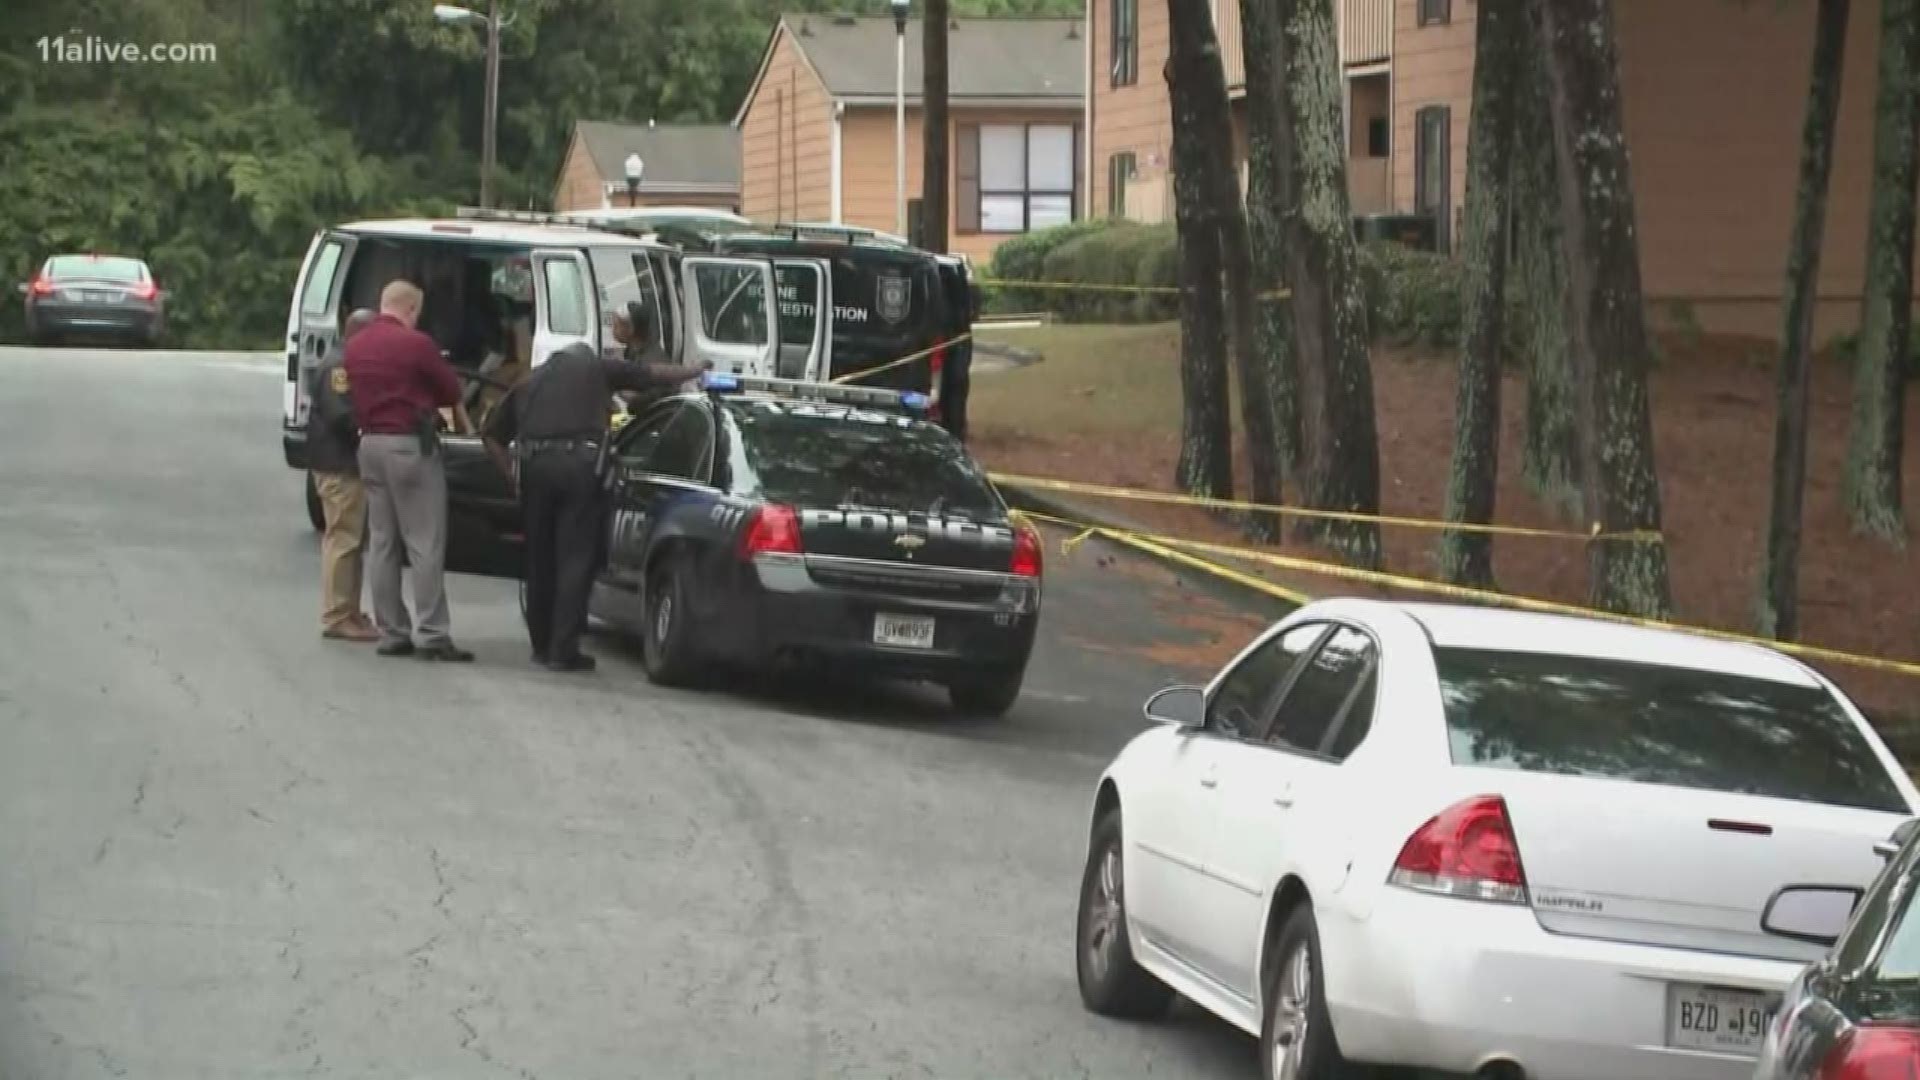 Police are learning more about a man who was killed in a shooting early Sunday morning at a DeKalb County apartment complex.